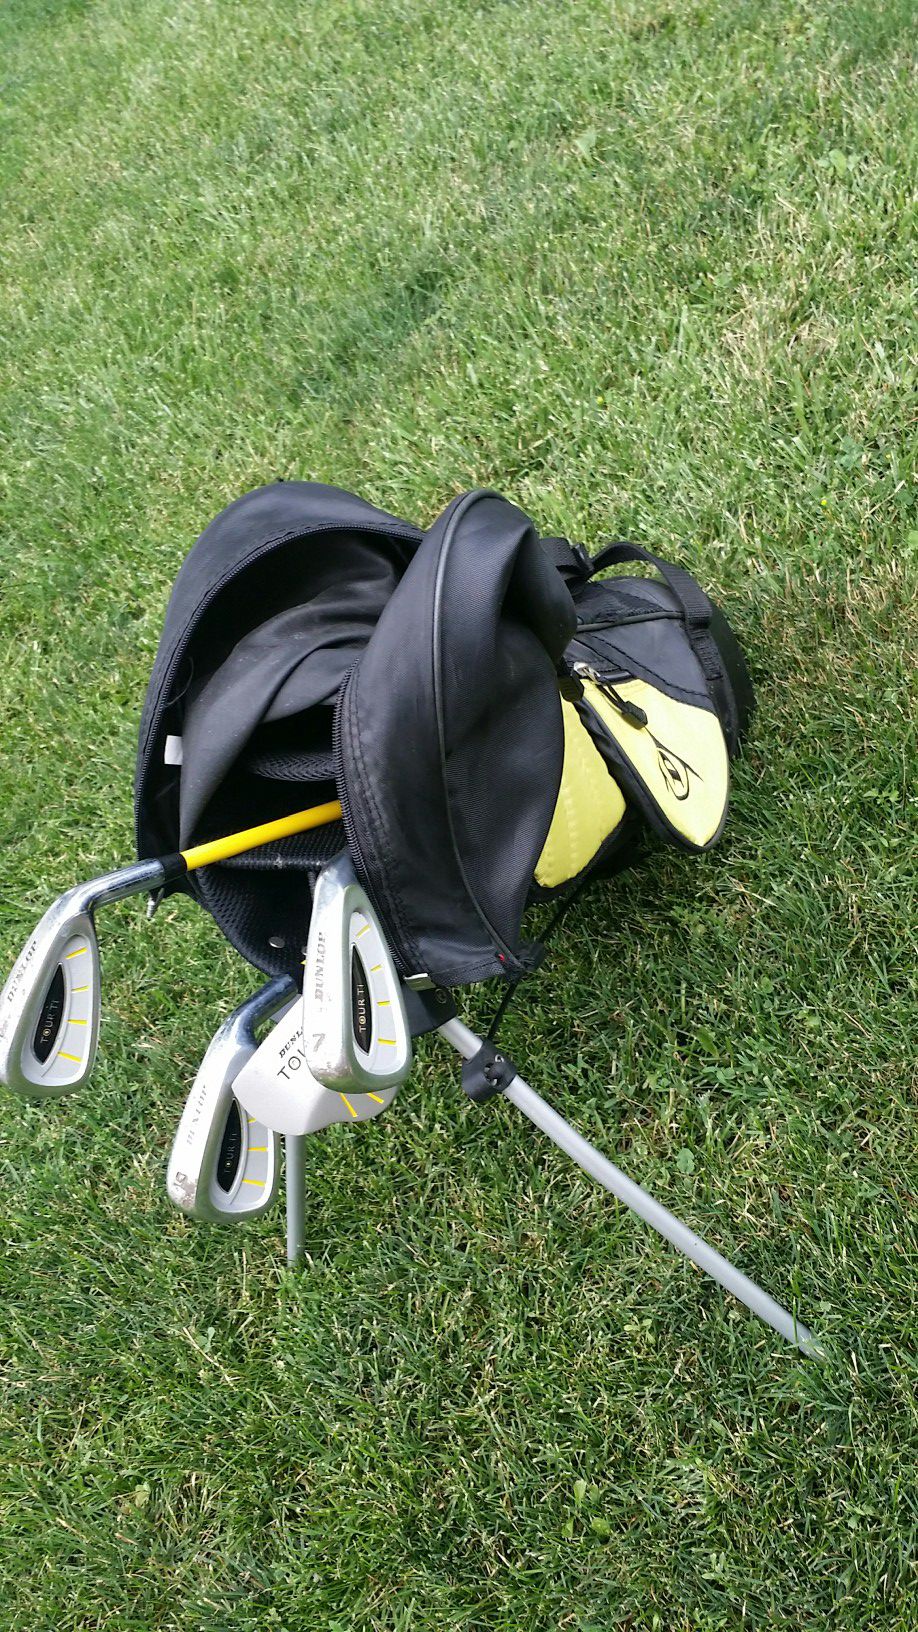 Child's golf clubs and bag